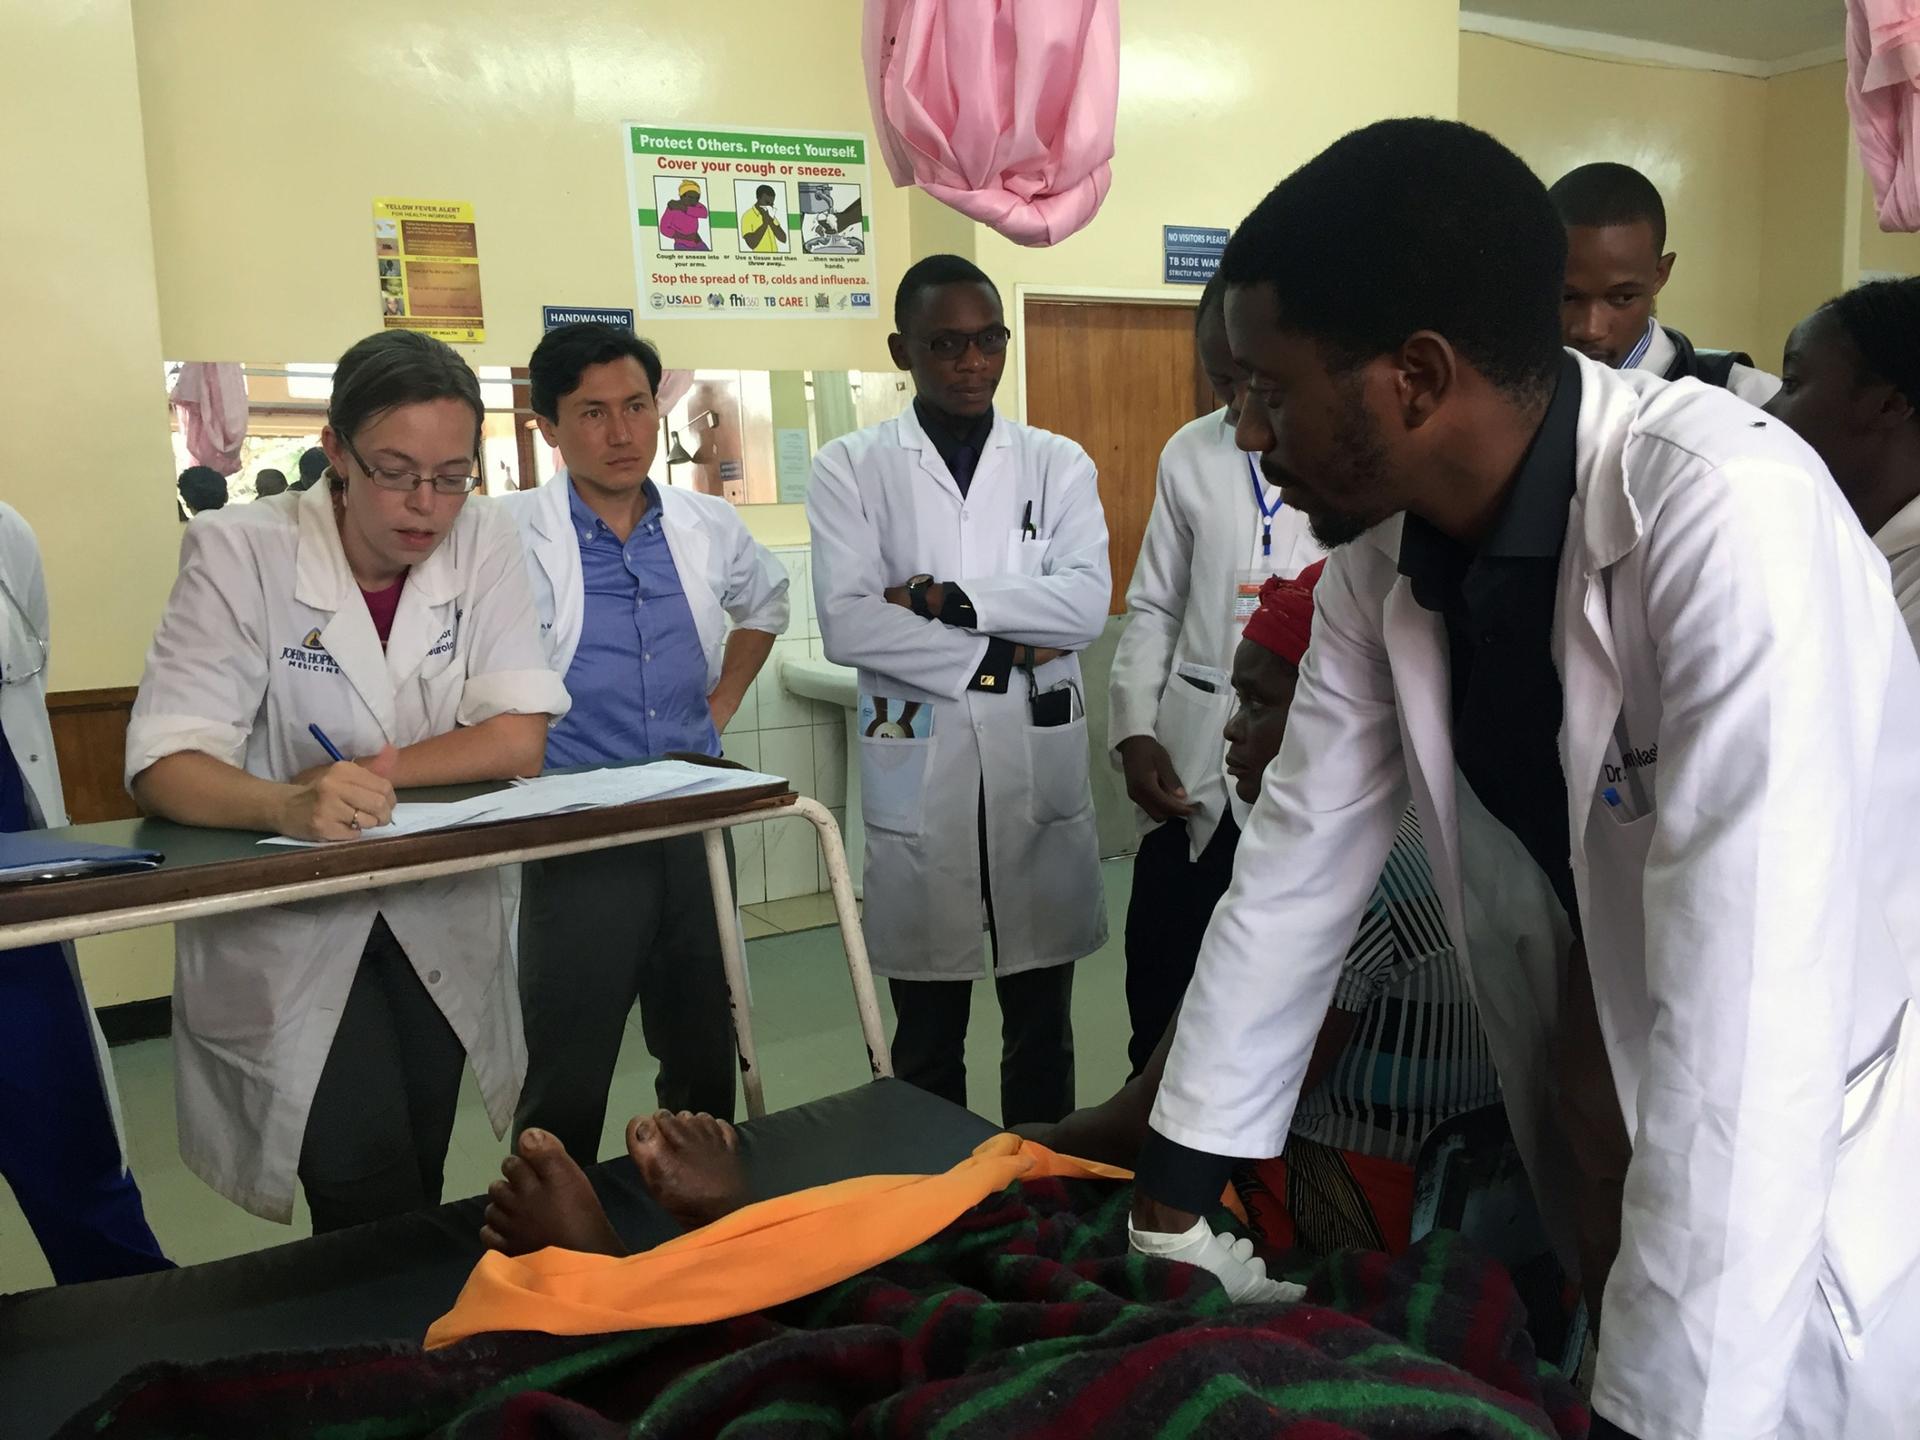 Neurologist Deanna Saylor (far left) evaluates patients at University Teaching Hospital during rounds with the neurology residents. Dr. Mashina Chomba (far right) is among them and is one of the first Zambian neurologists trained through the new program.